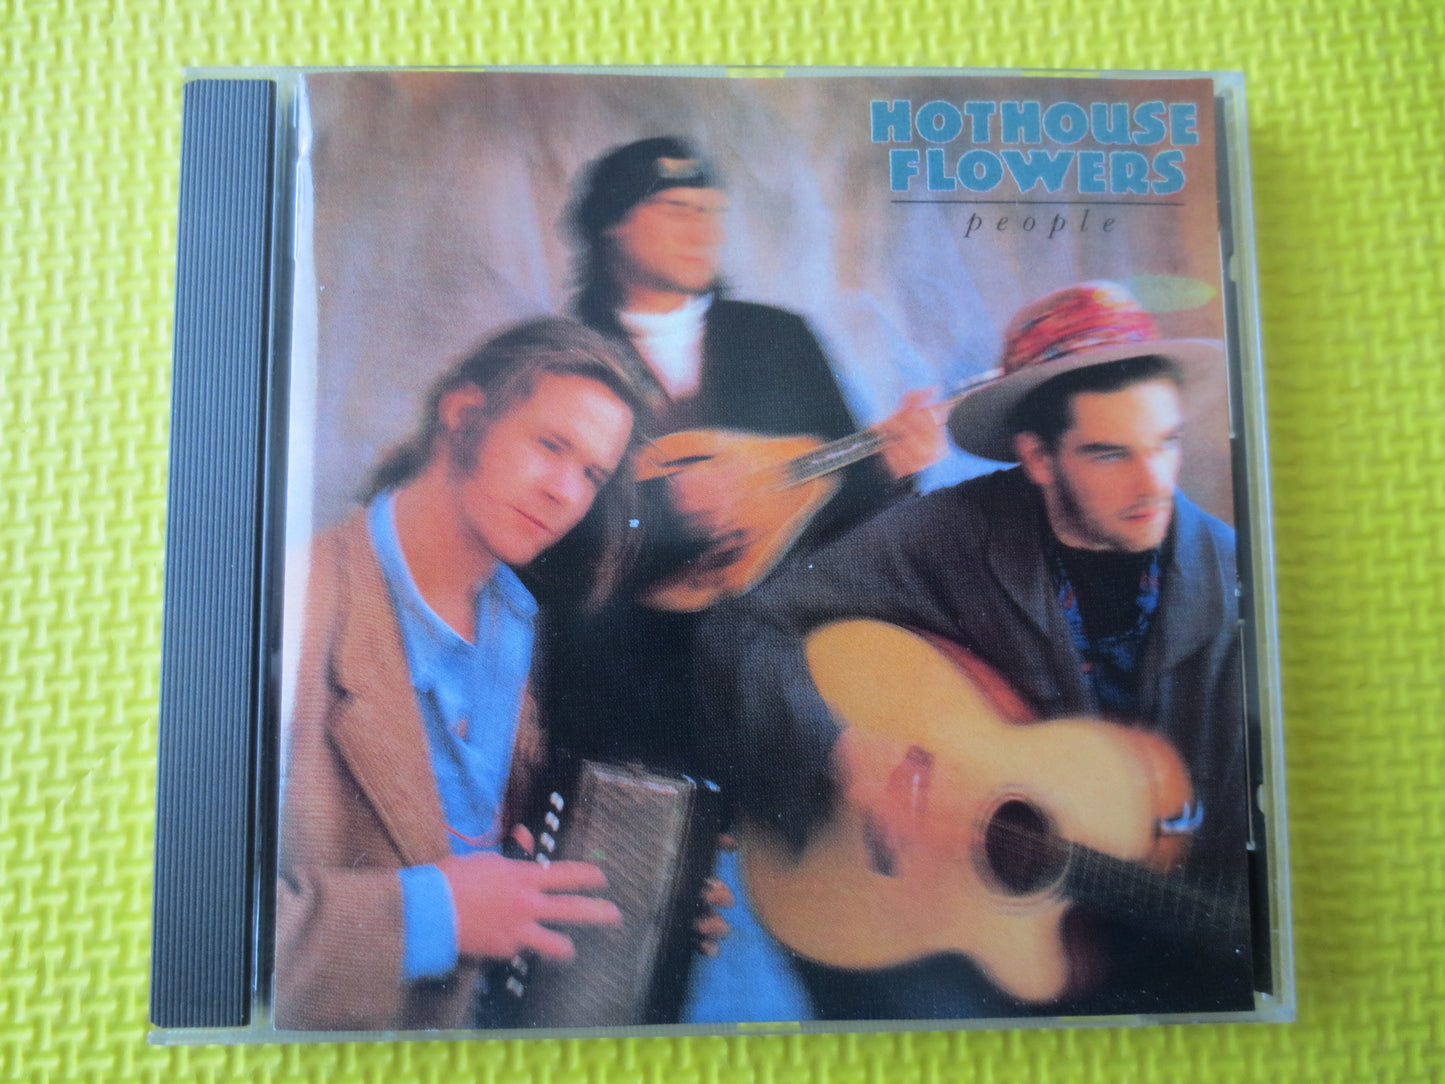 HOTHOUSE FLOWERS, PEOPLE, Rock Cds, Hothouse Flowers Cds, Hothouse Flowers Lps, Classic Rock Cds, Music Cd, 1988 Compact Discs